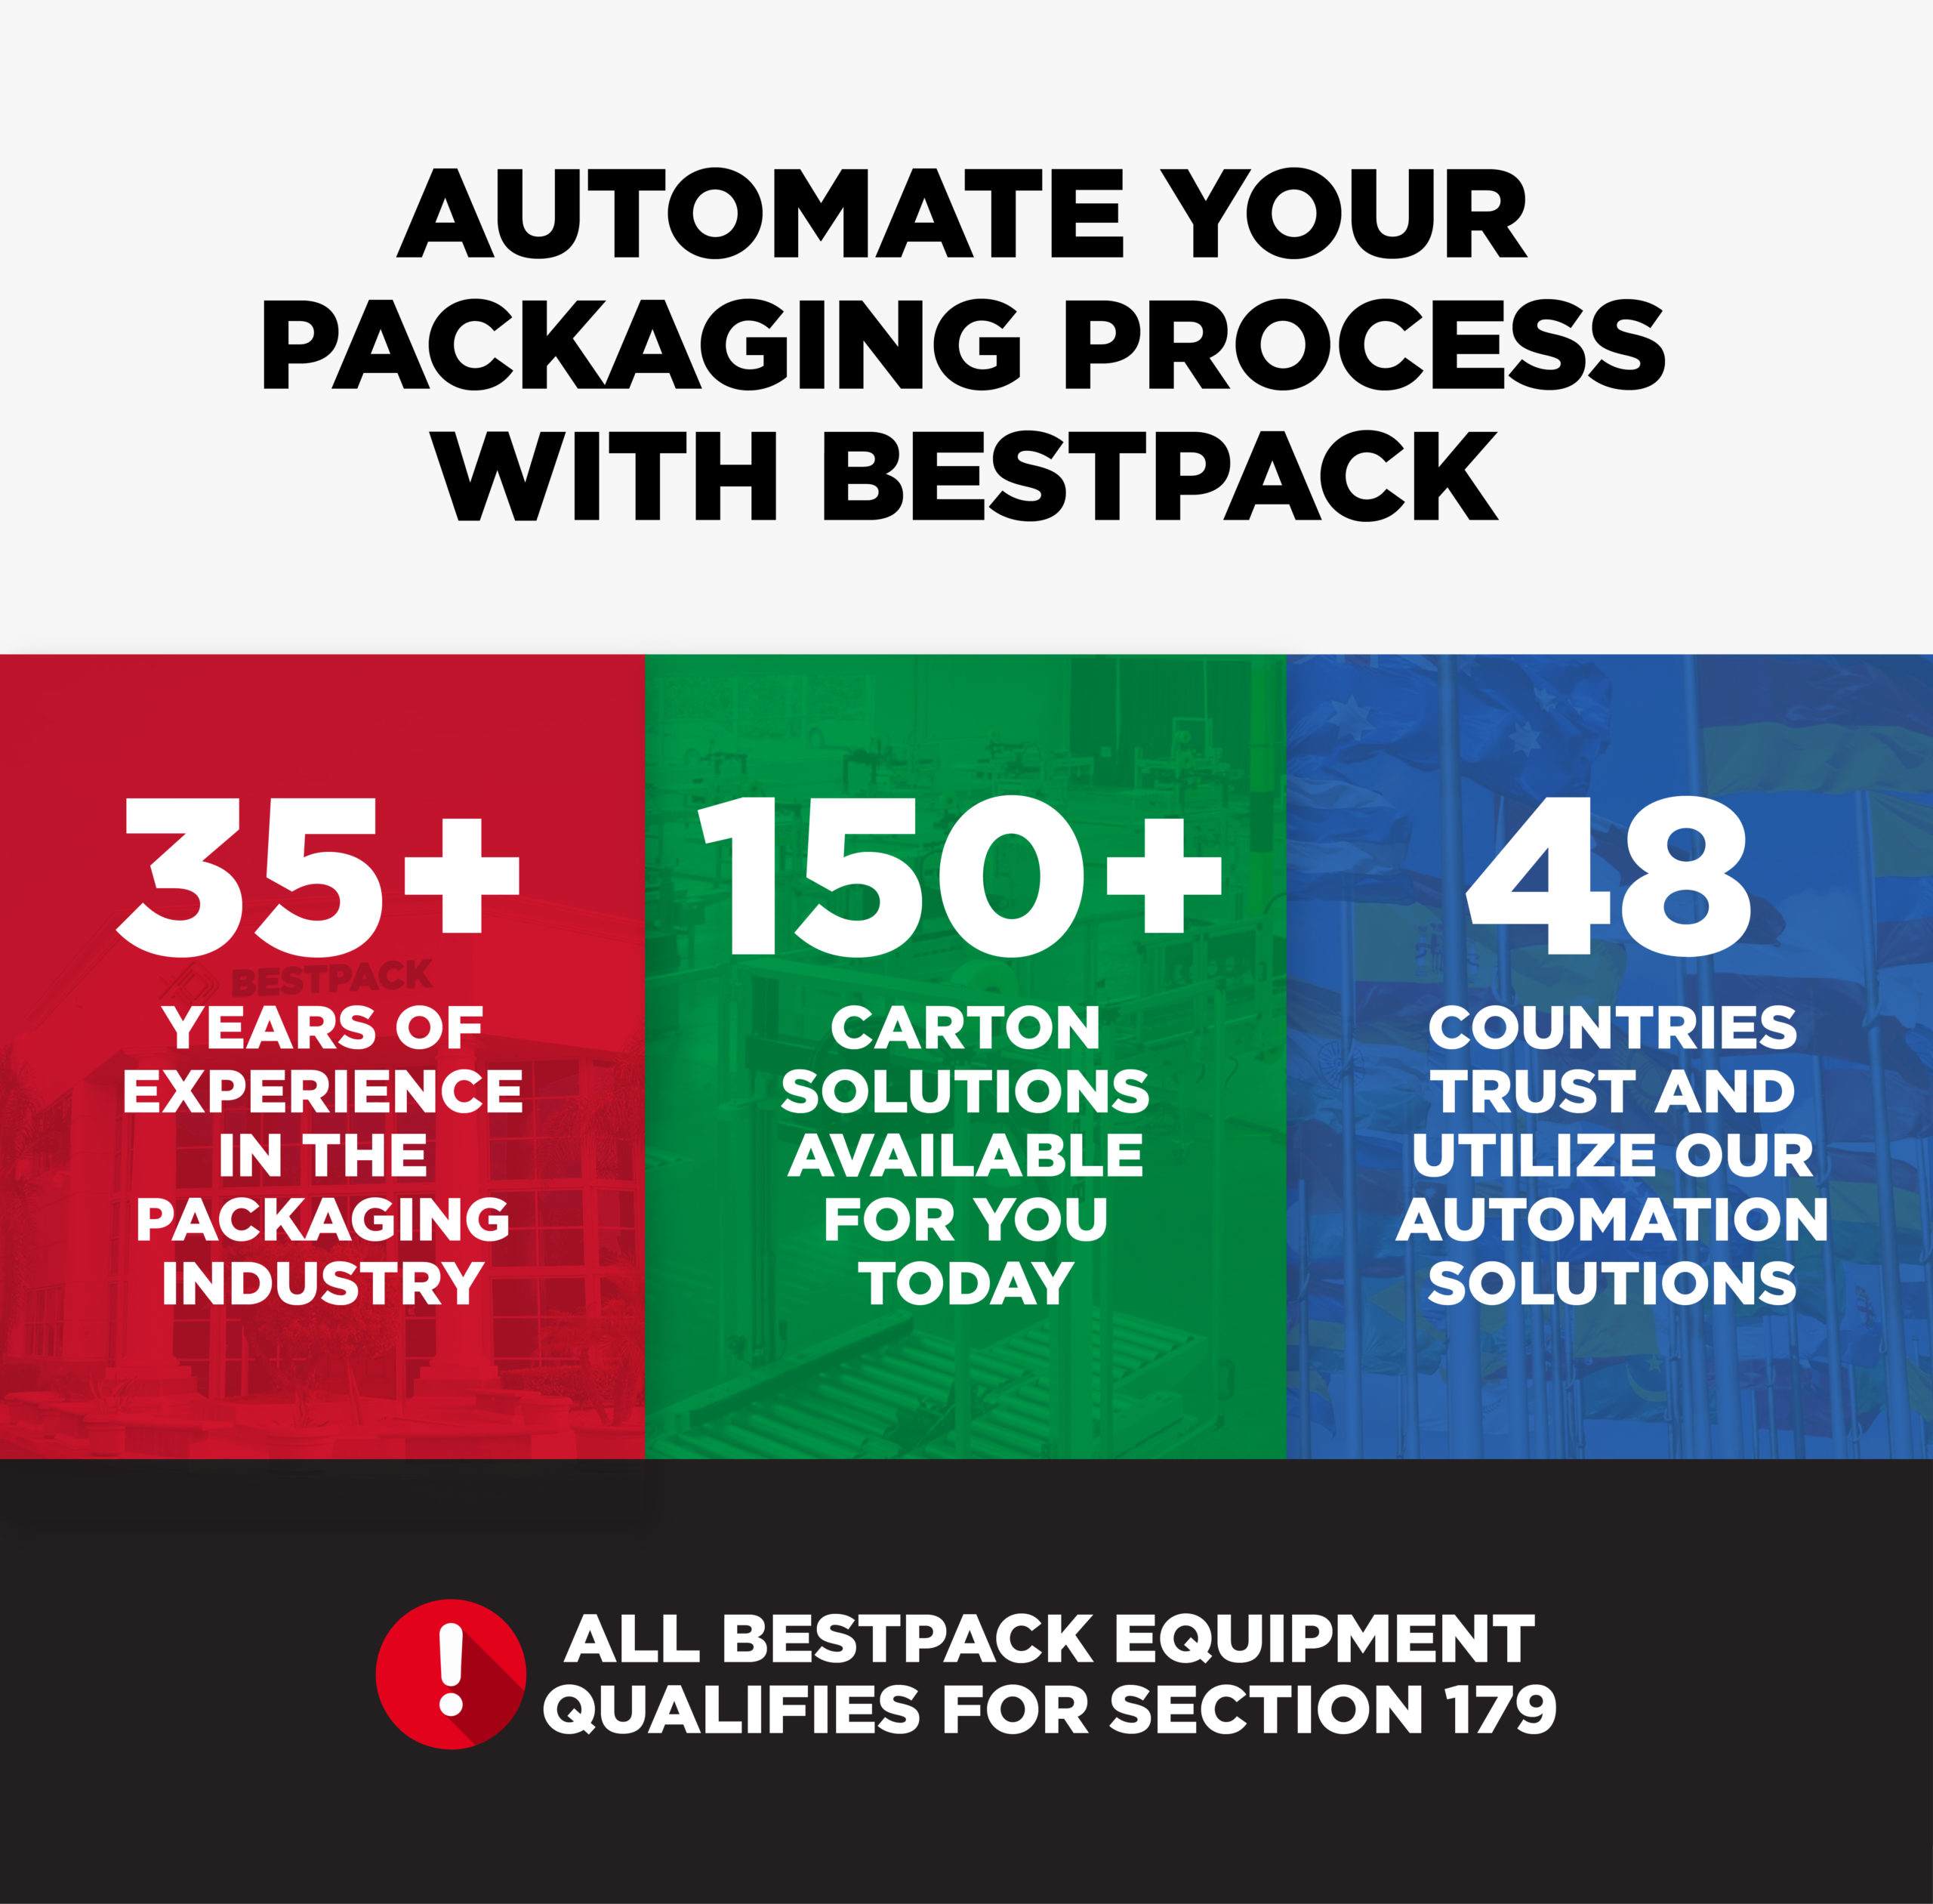 "Automate your packaging process with BestPack."